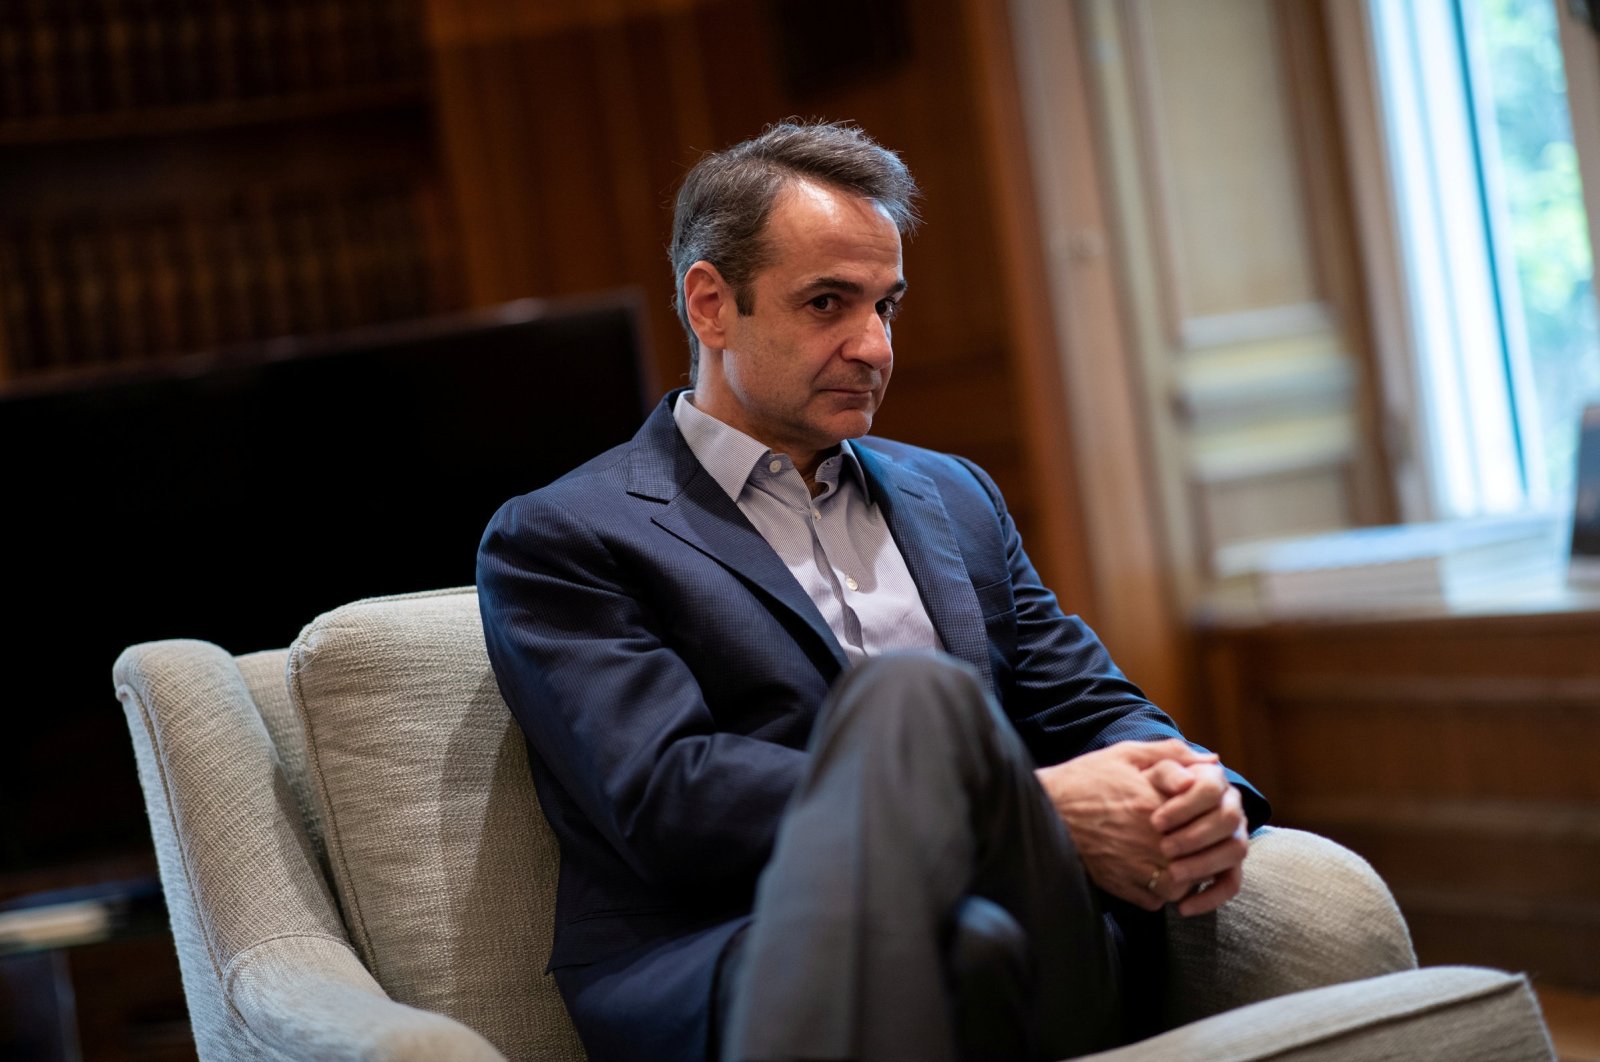 Greek Prime Minister Kyriakos Mitsotakis looks on before his meeting with Managing Director of the European Stability Mechanism Klaus Regling in his office in the Maximos Mansion in Athens, Greece, March 7, 2020. (Reuters Photo)